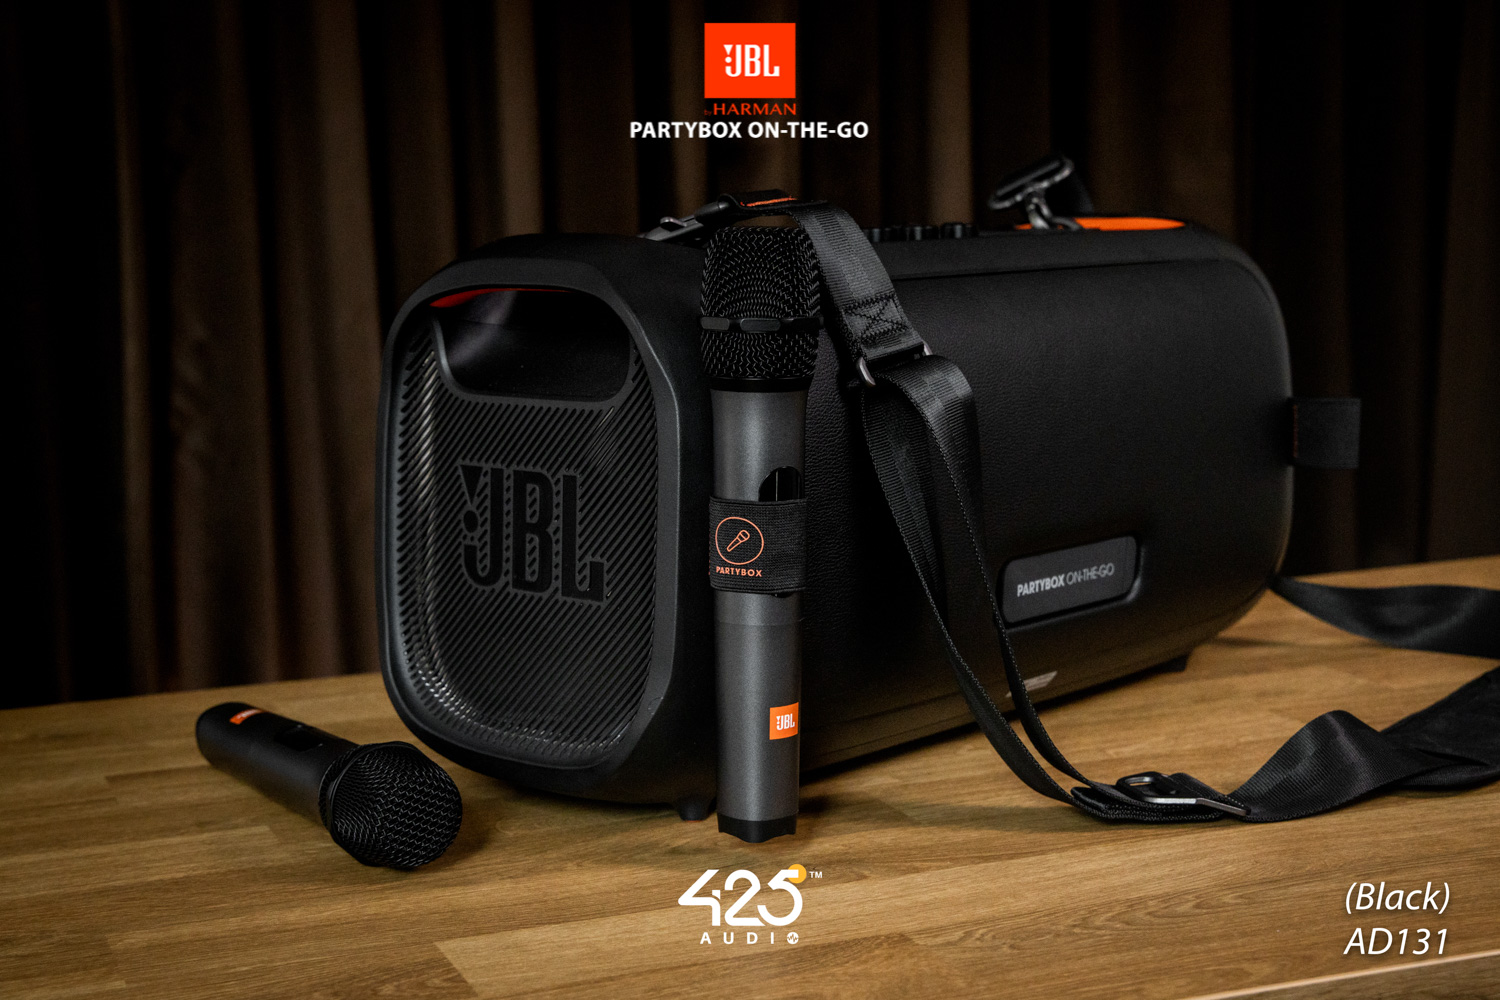 JBL_PartyBox_On_The_Go